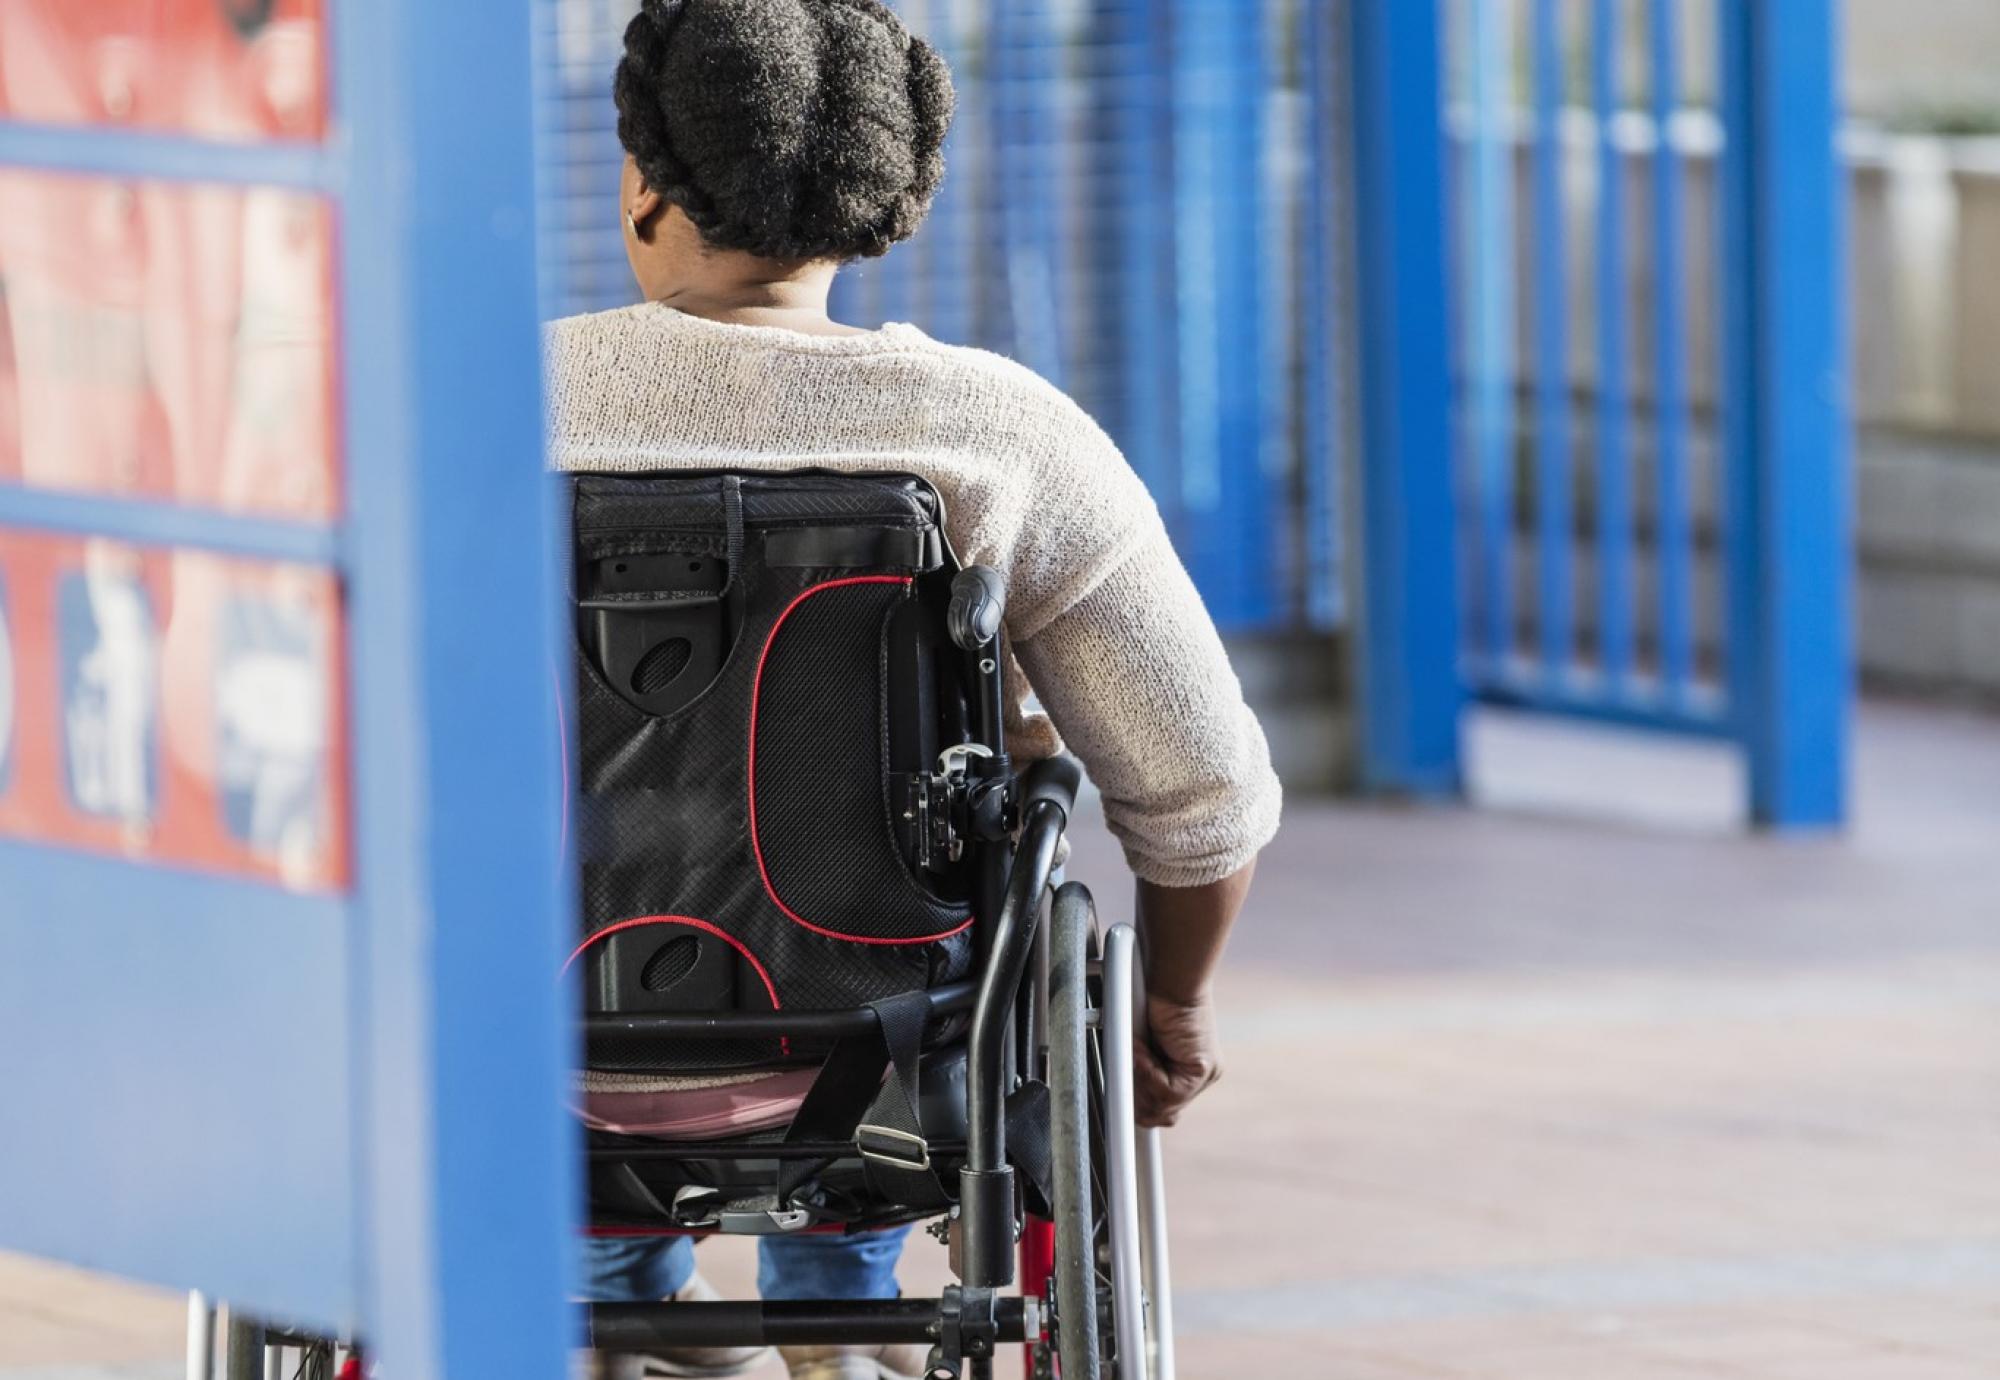 ORR: New guidelines to help disabled passengers 